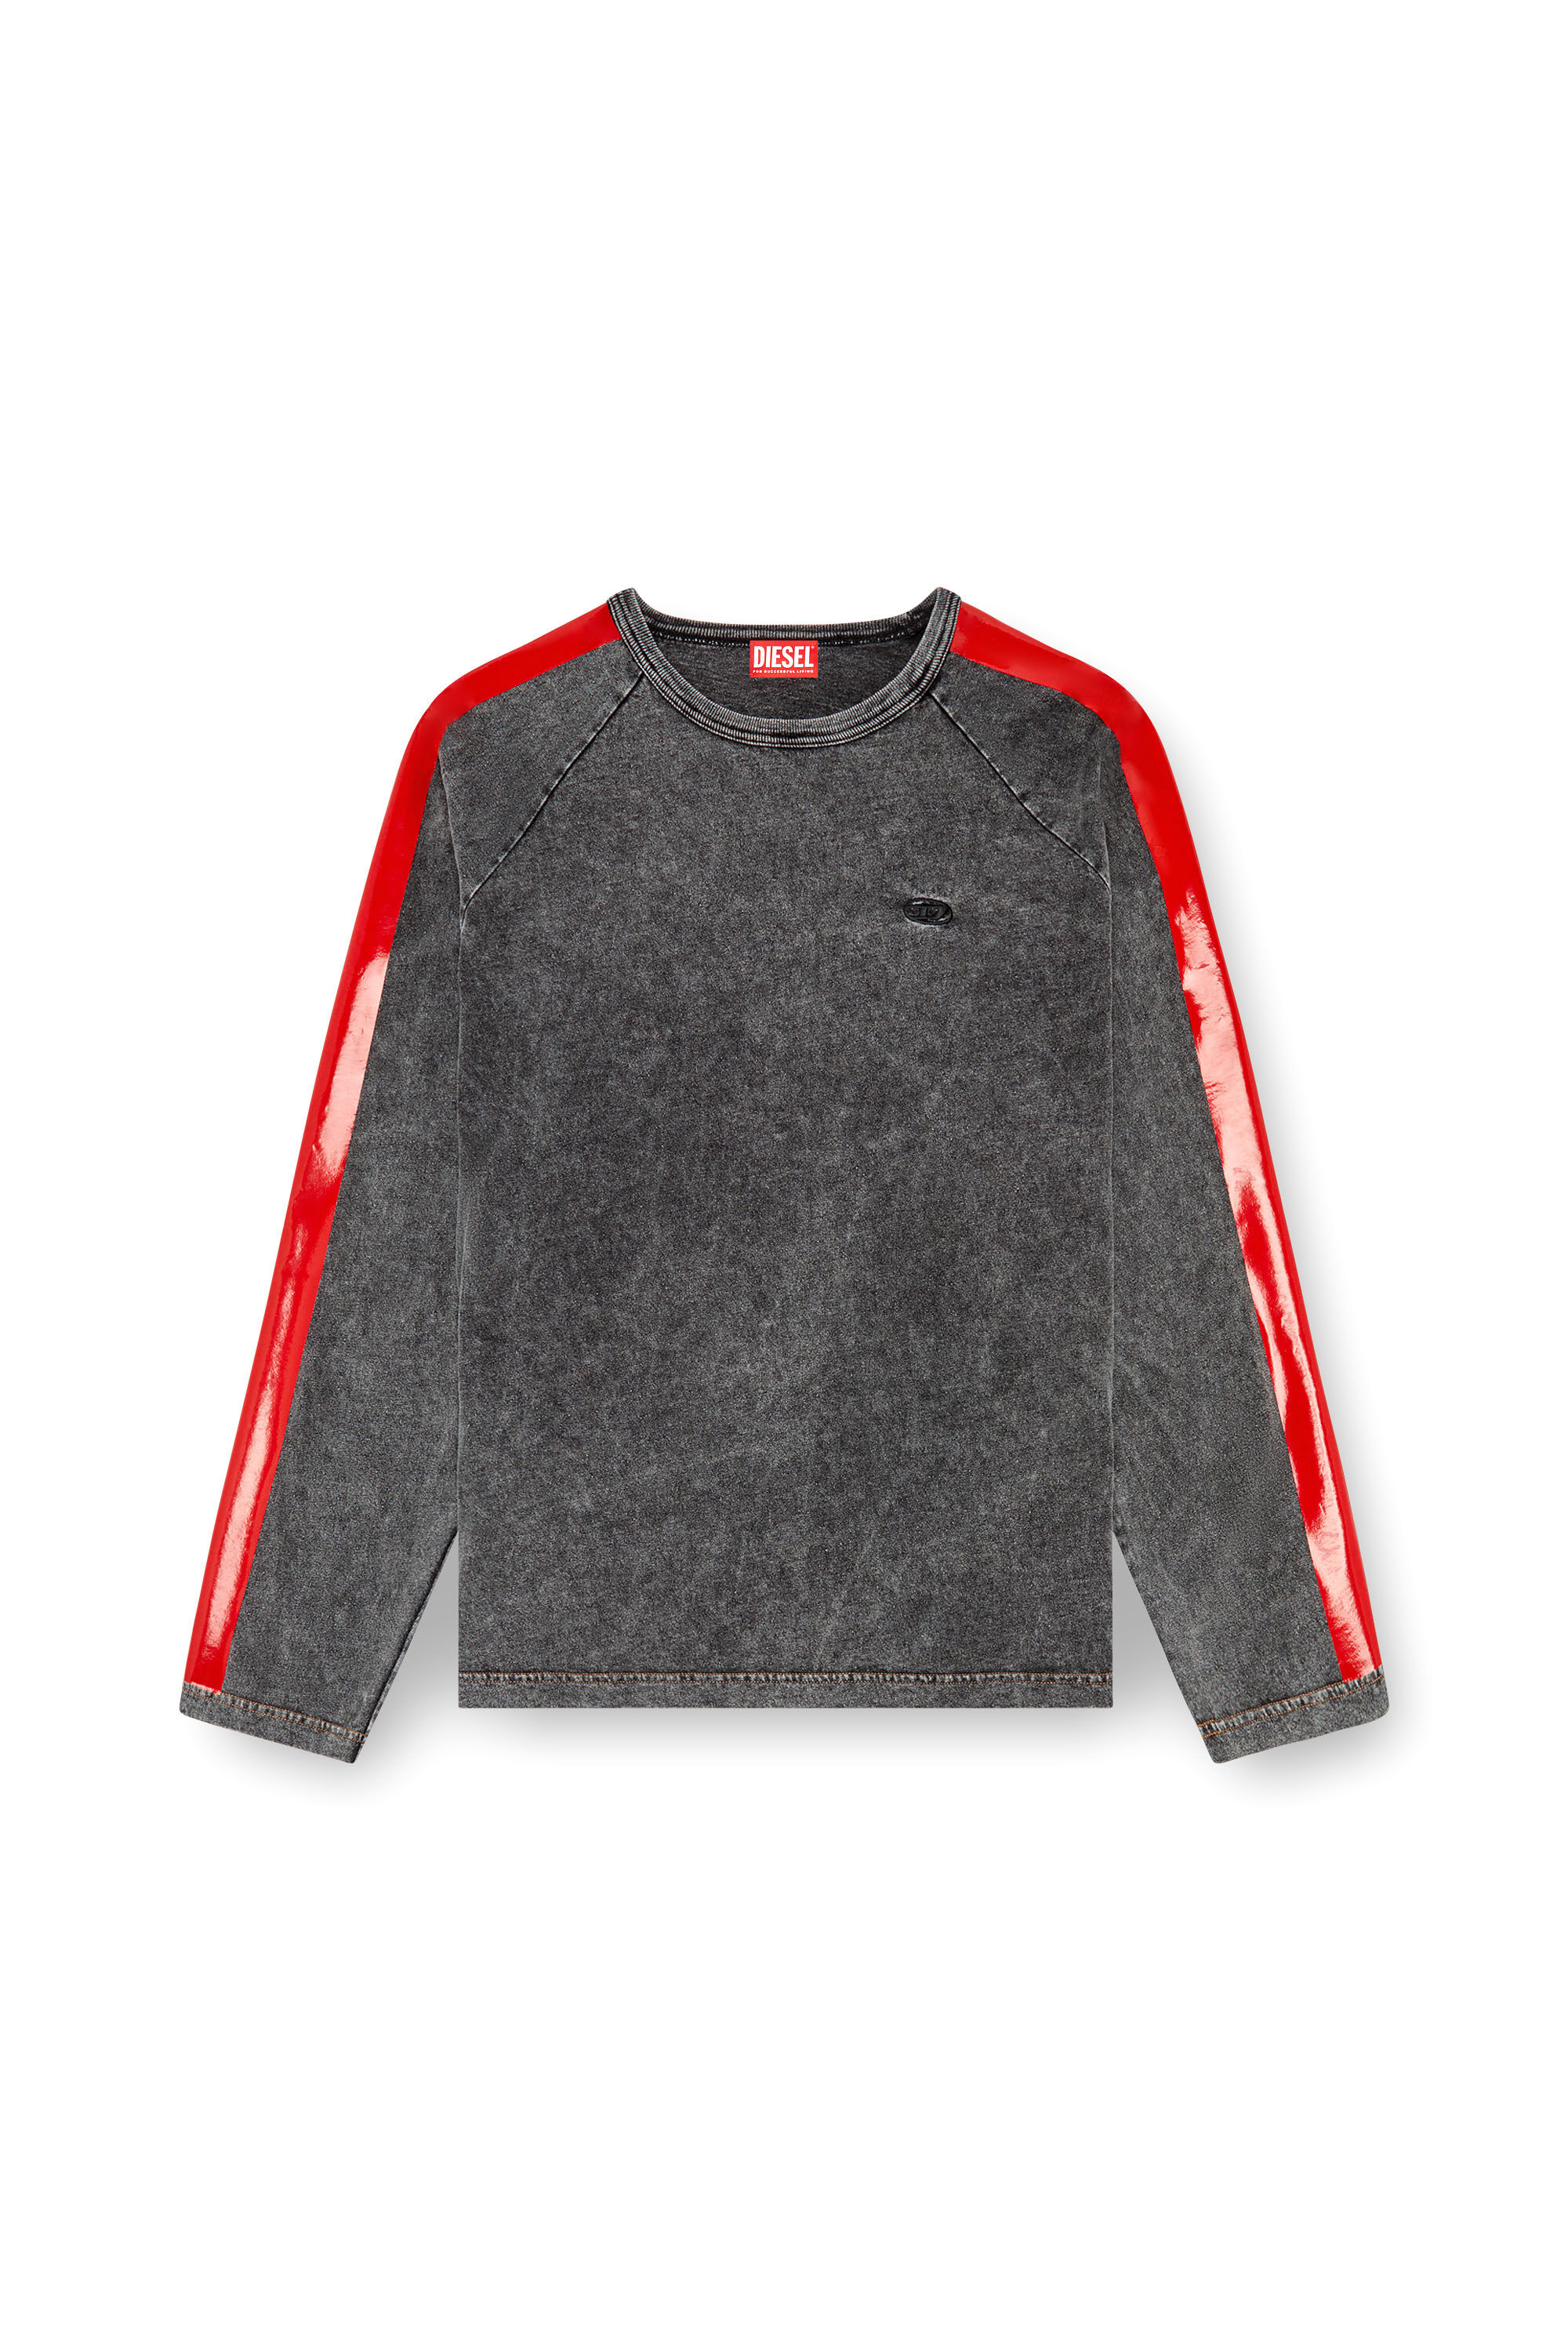 Diesel - T-REDROXT, Uomo T-shirt a maniche lunghe con fasce lucide in Nero - Image 2